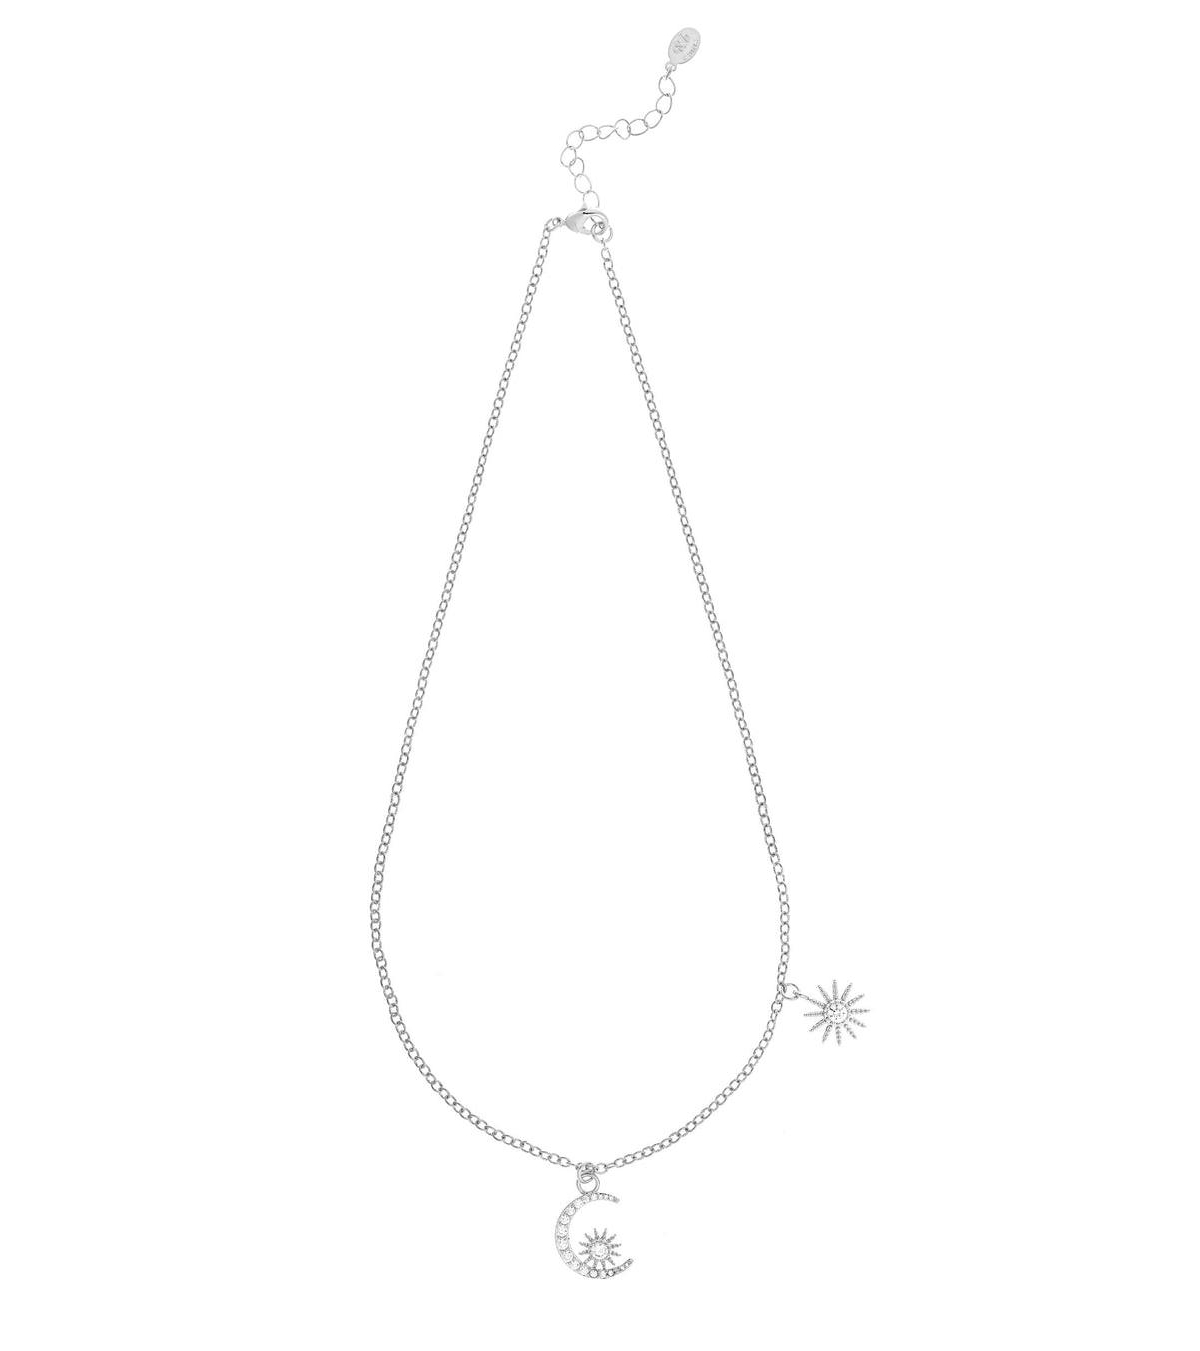 Rhodium Moon & Star Necklace - Silver with clear cubic zirconia